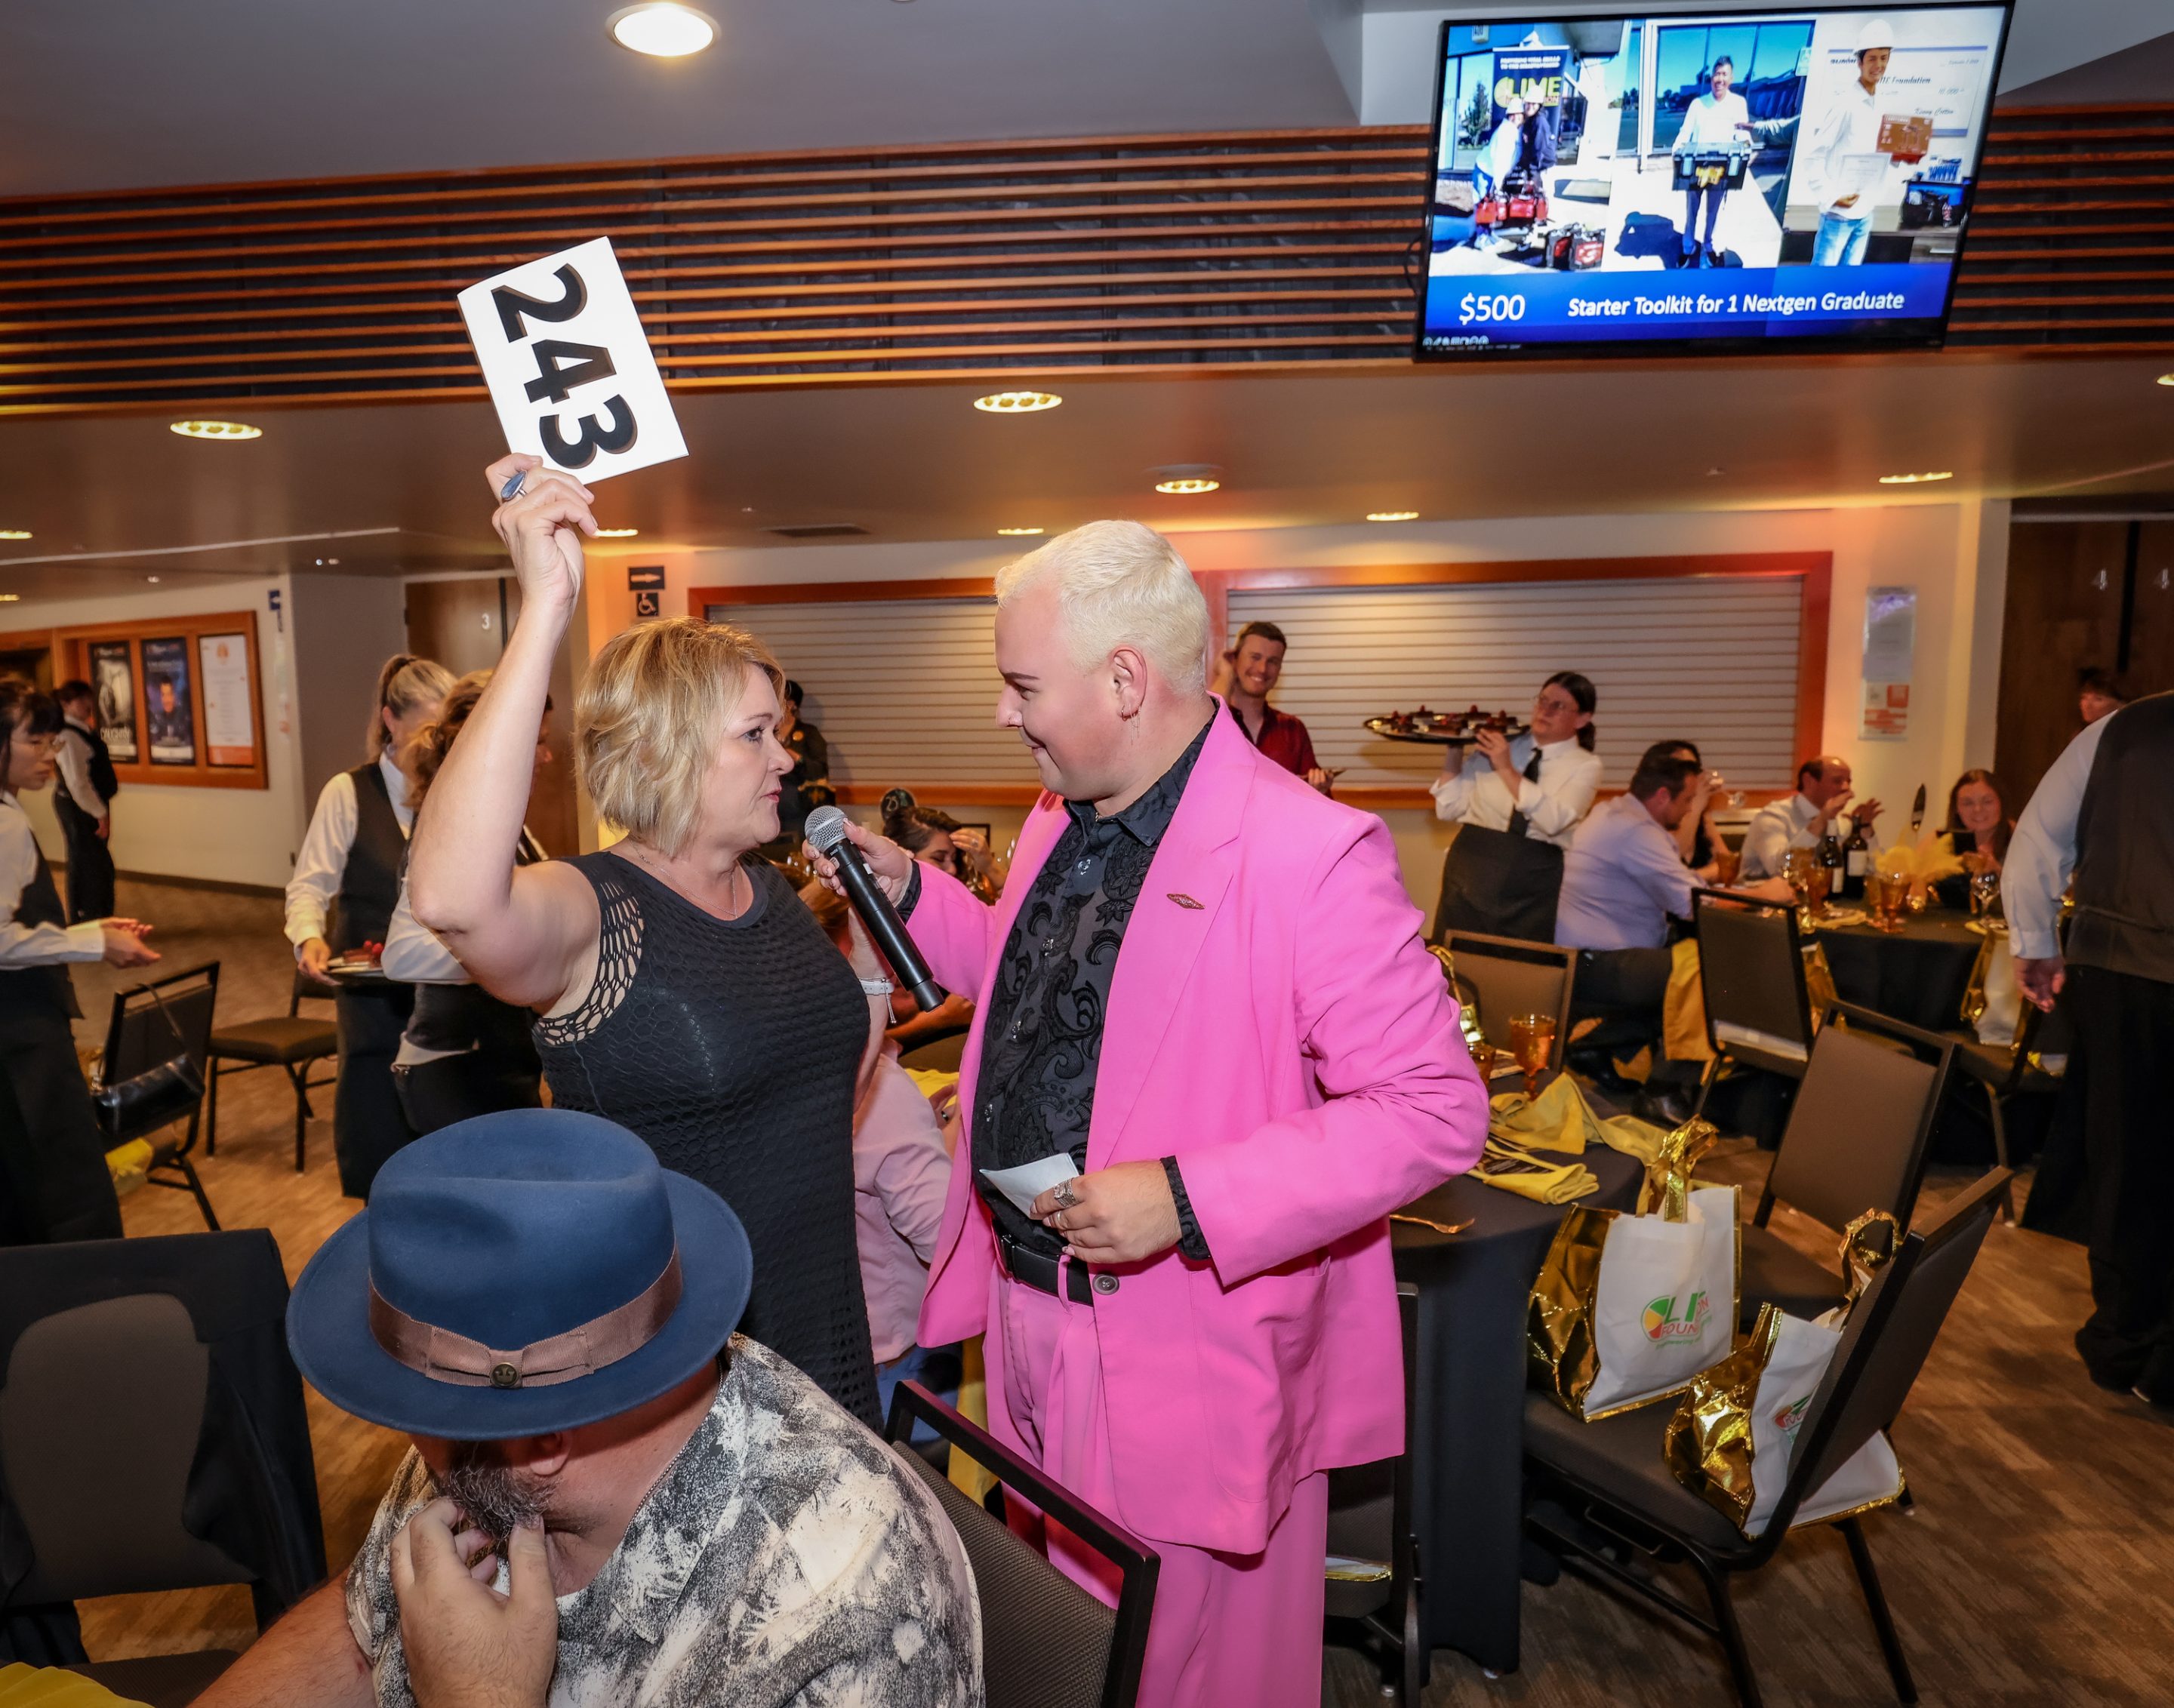 A man in a pink suit is holding up a sign for The LIME Foundation of Santa Rosa, a Sonoma County Non-Profit Organization.